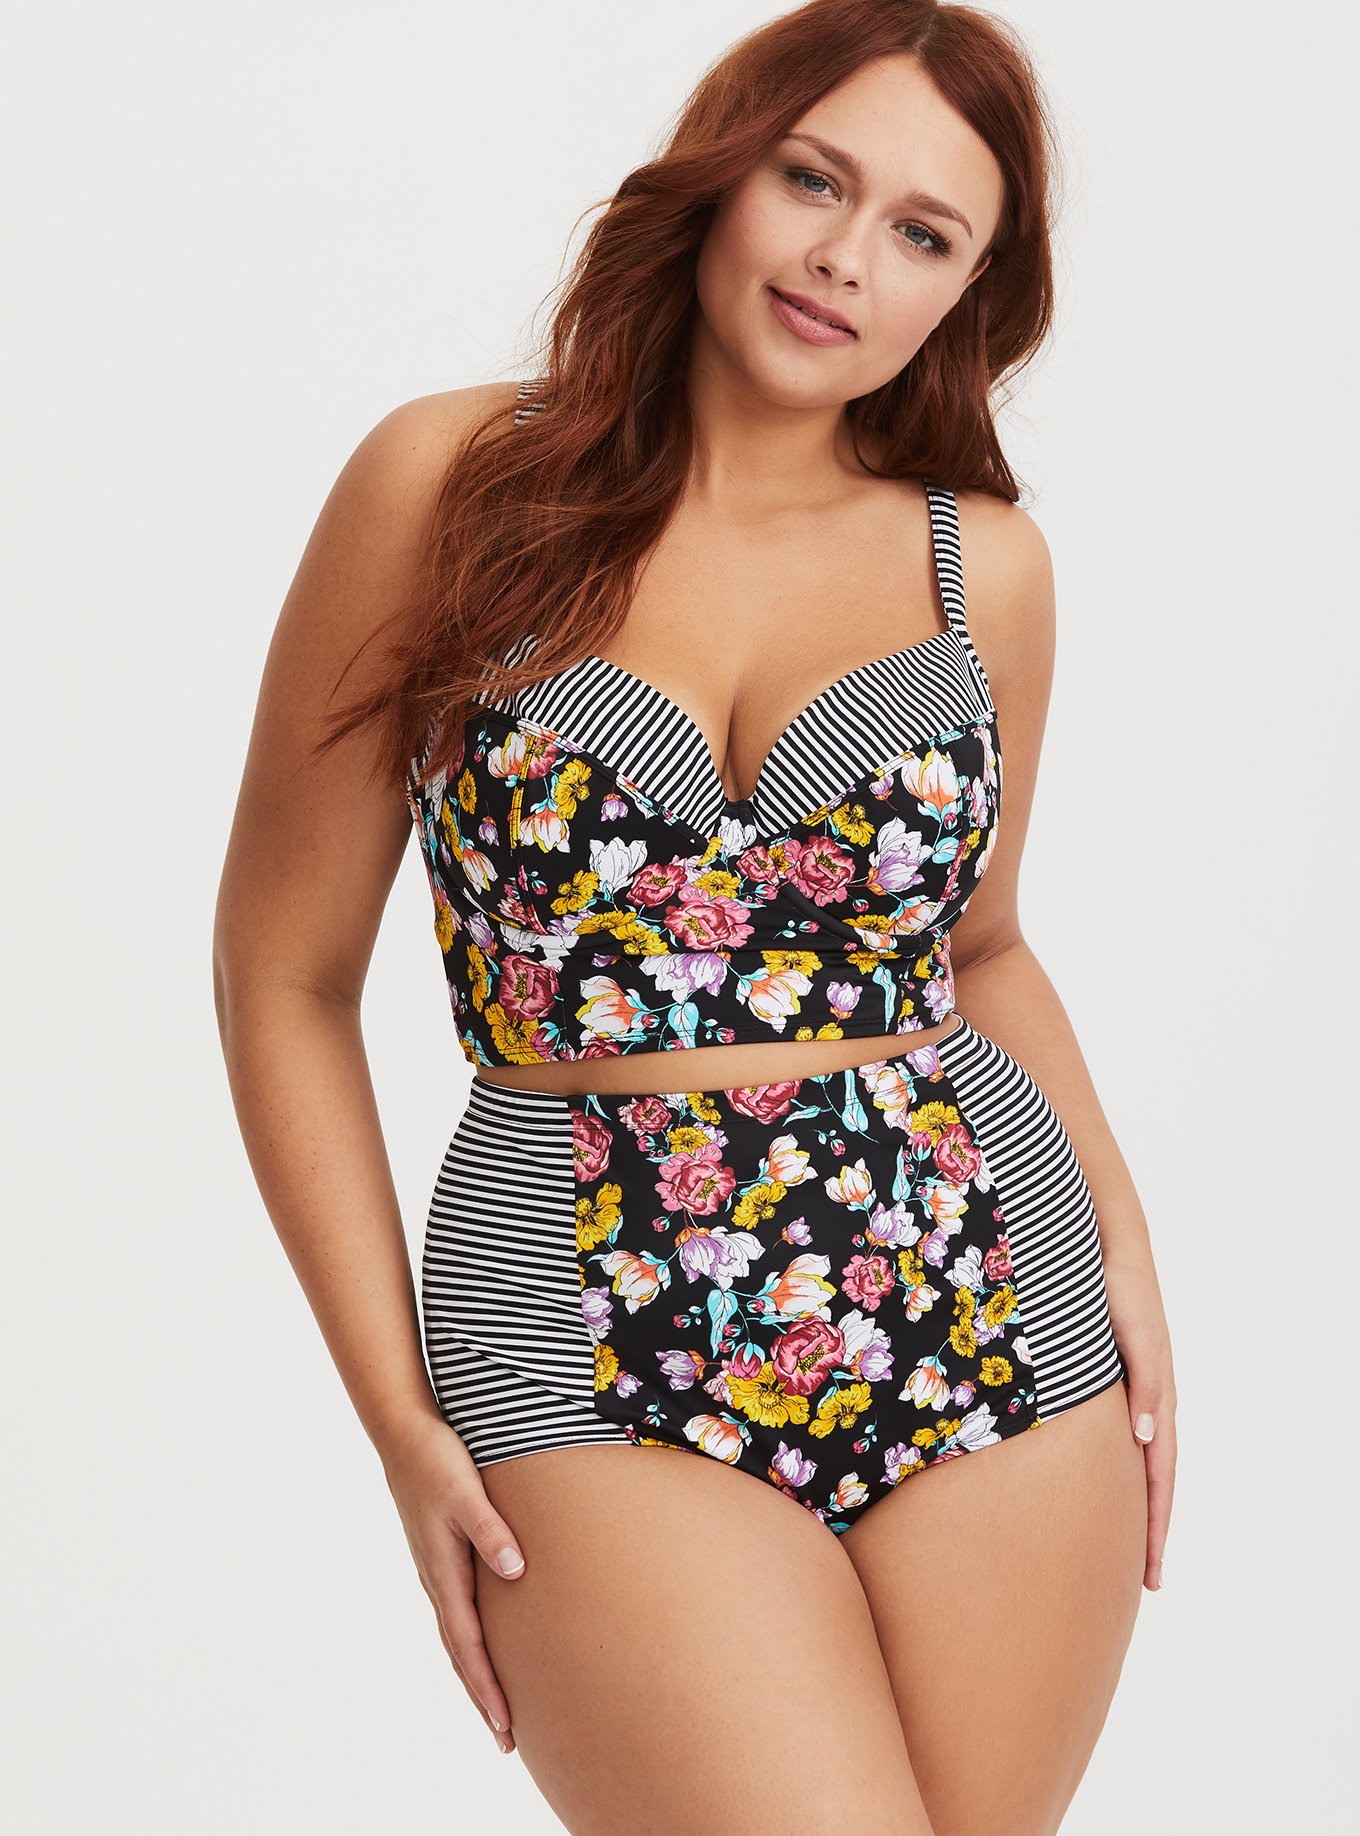 Plus-Size Swimsuits With Underwire 